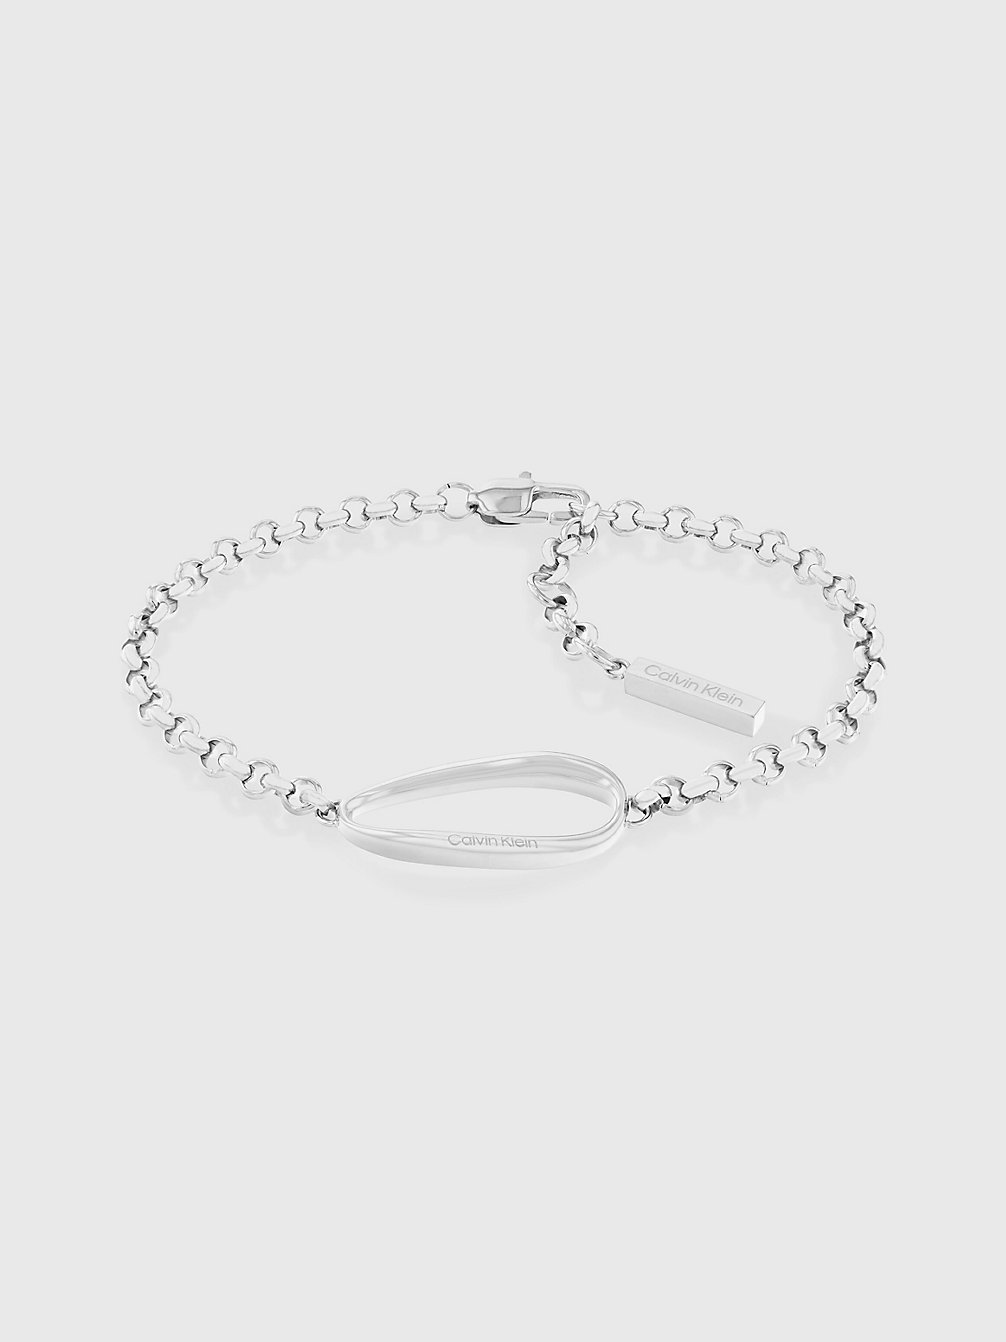 Pulsera - Playful Organic Shapes > SILVER > undefined mujer > Calvin Klein